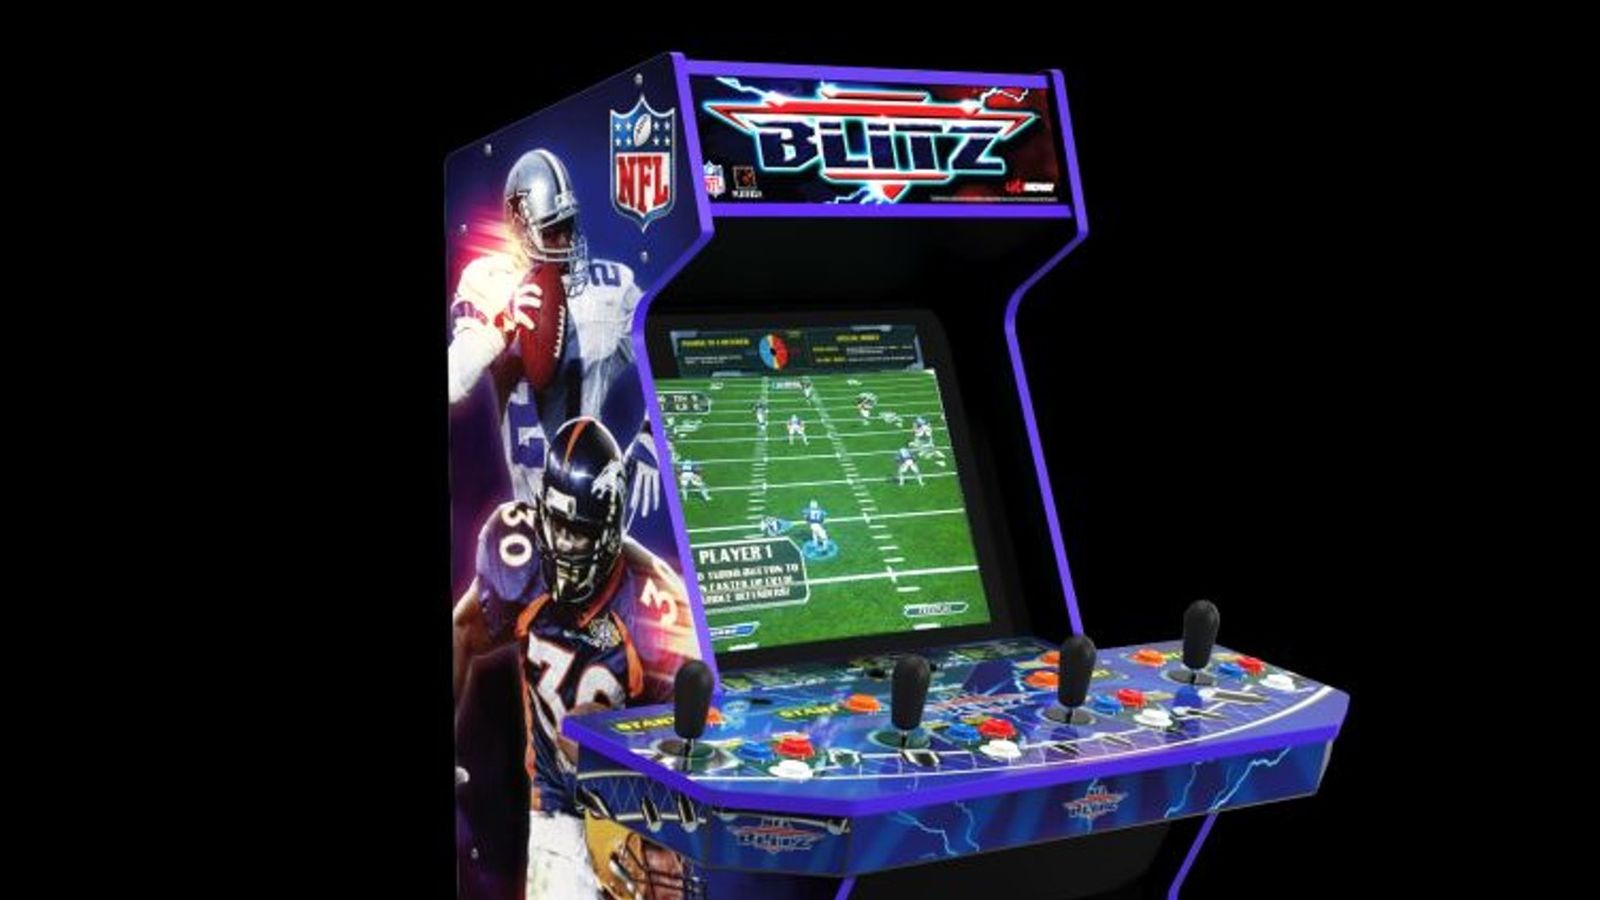 NFL Blitz is heading to a home near you courtesy of Arcade1Up, with three games, online play, 49-way joystick, a custom riser, light up marquee, and more — GAMINGTREND